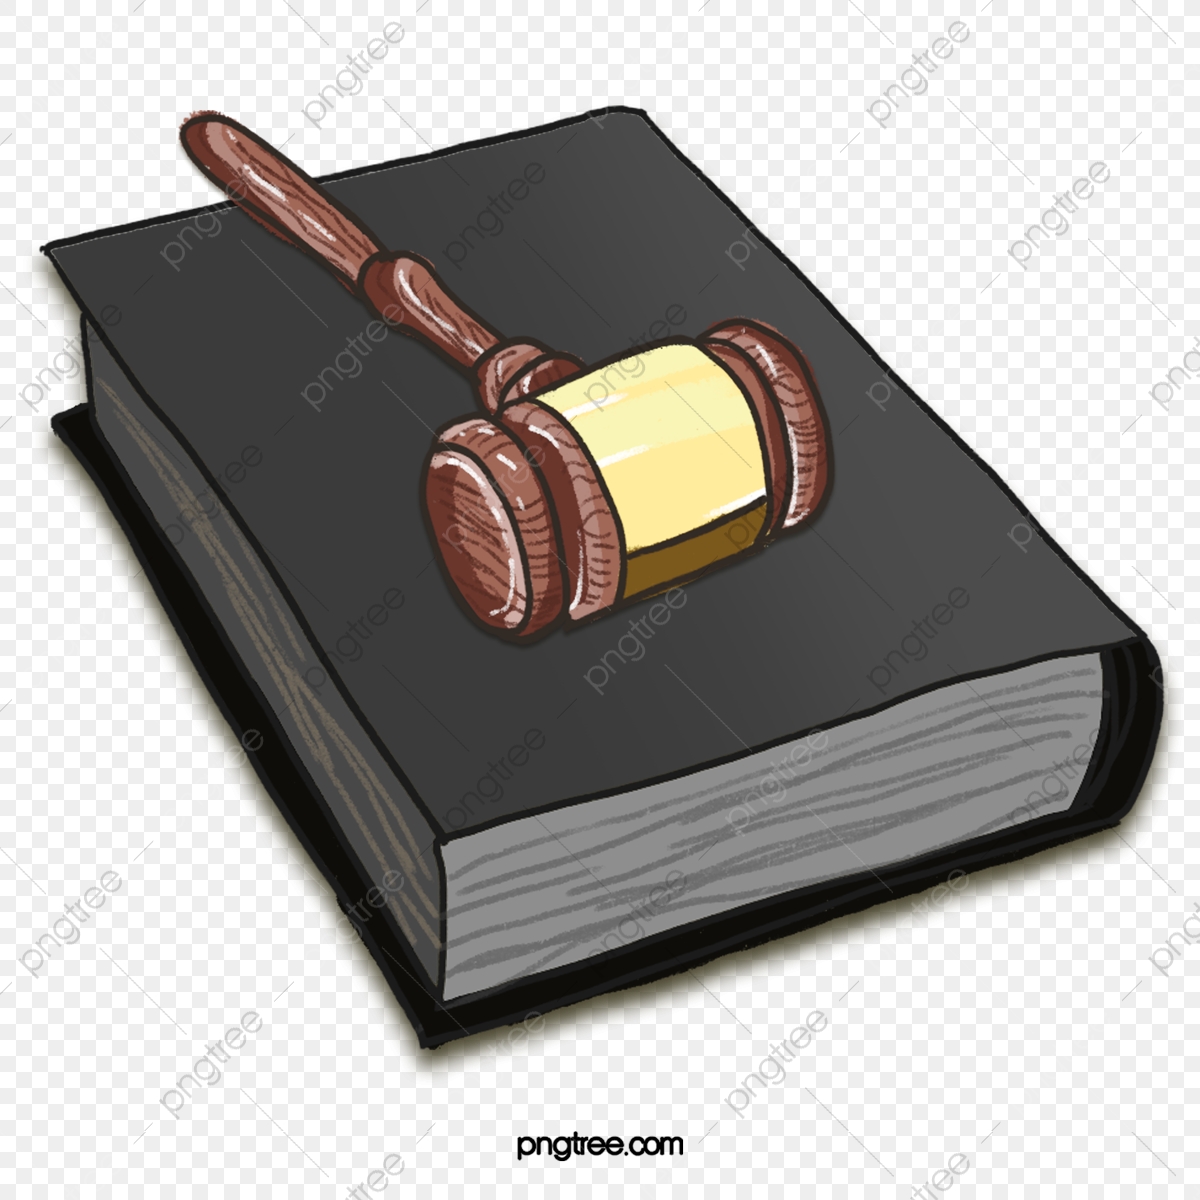 lawyer clipart equitable